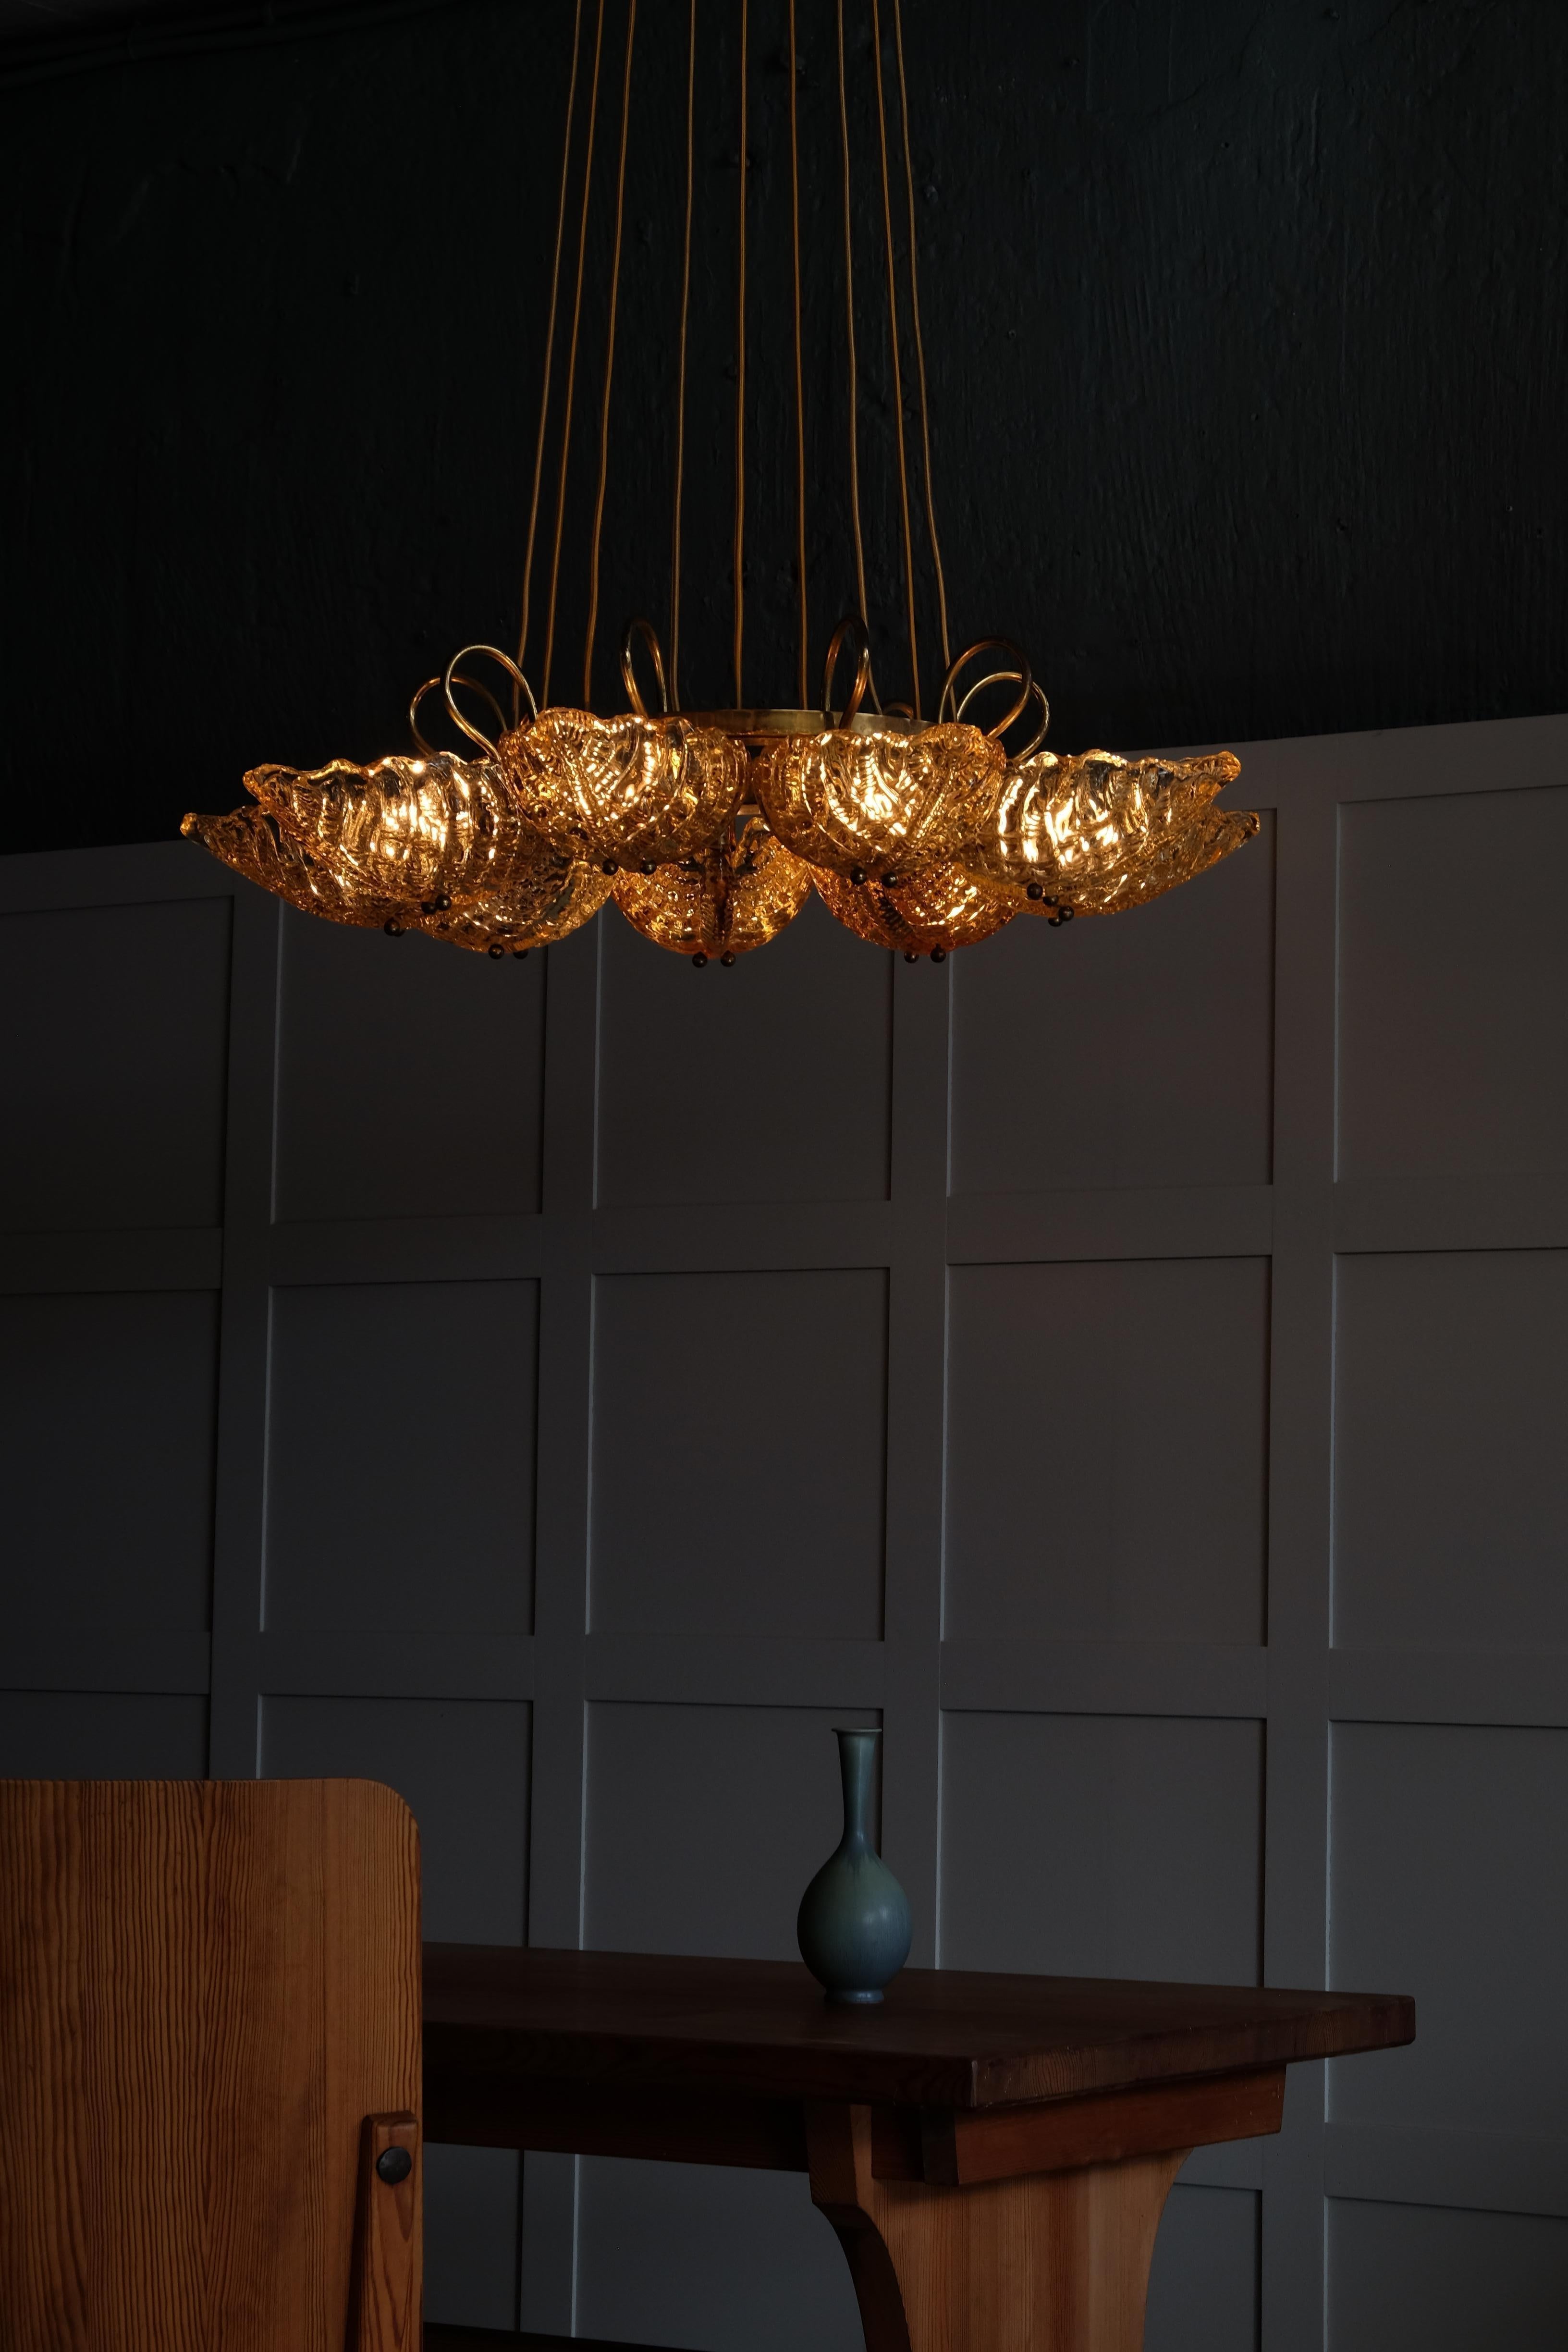 Extremely rare Orrefors glass and brass chandelier designed by Fritz Kurz, 1946, Sweden.
Excellent vintage condition, new wiring. 
Measures: Diameter 90 cm
Height 140 cm (adjustable).